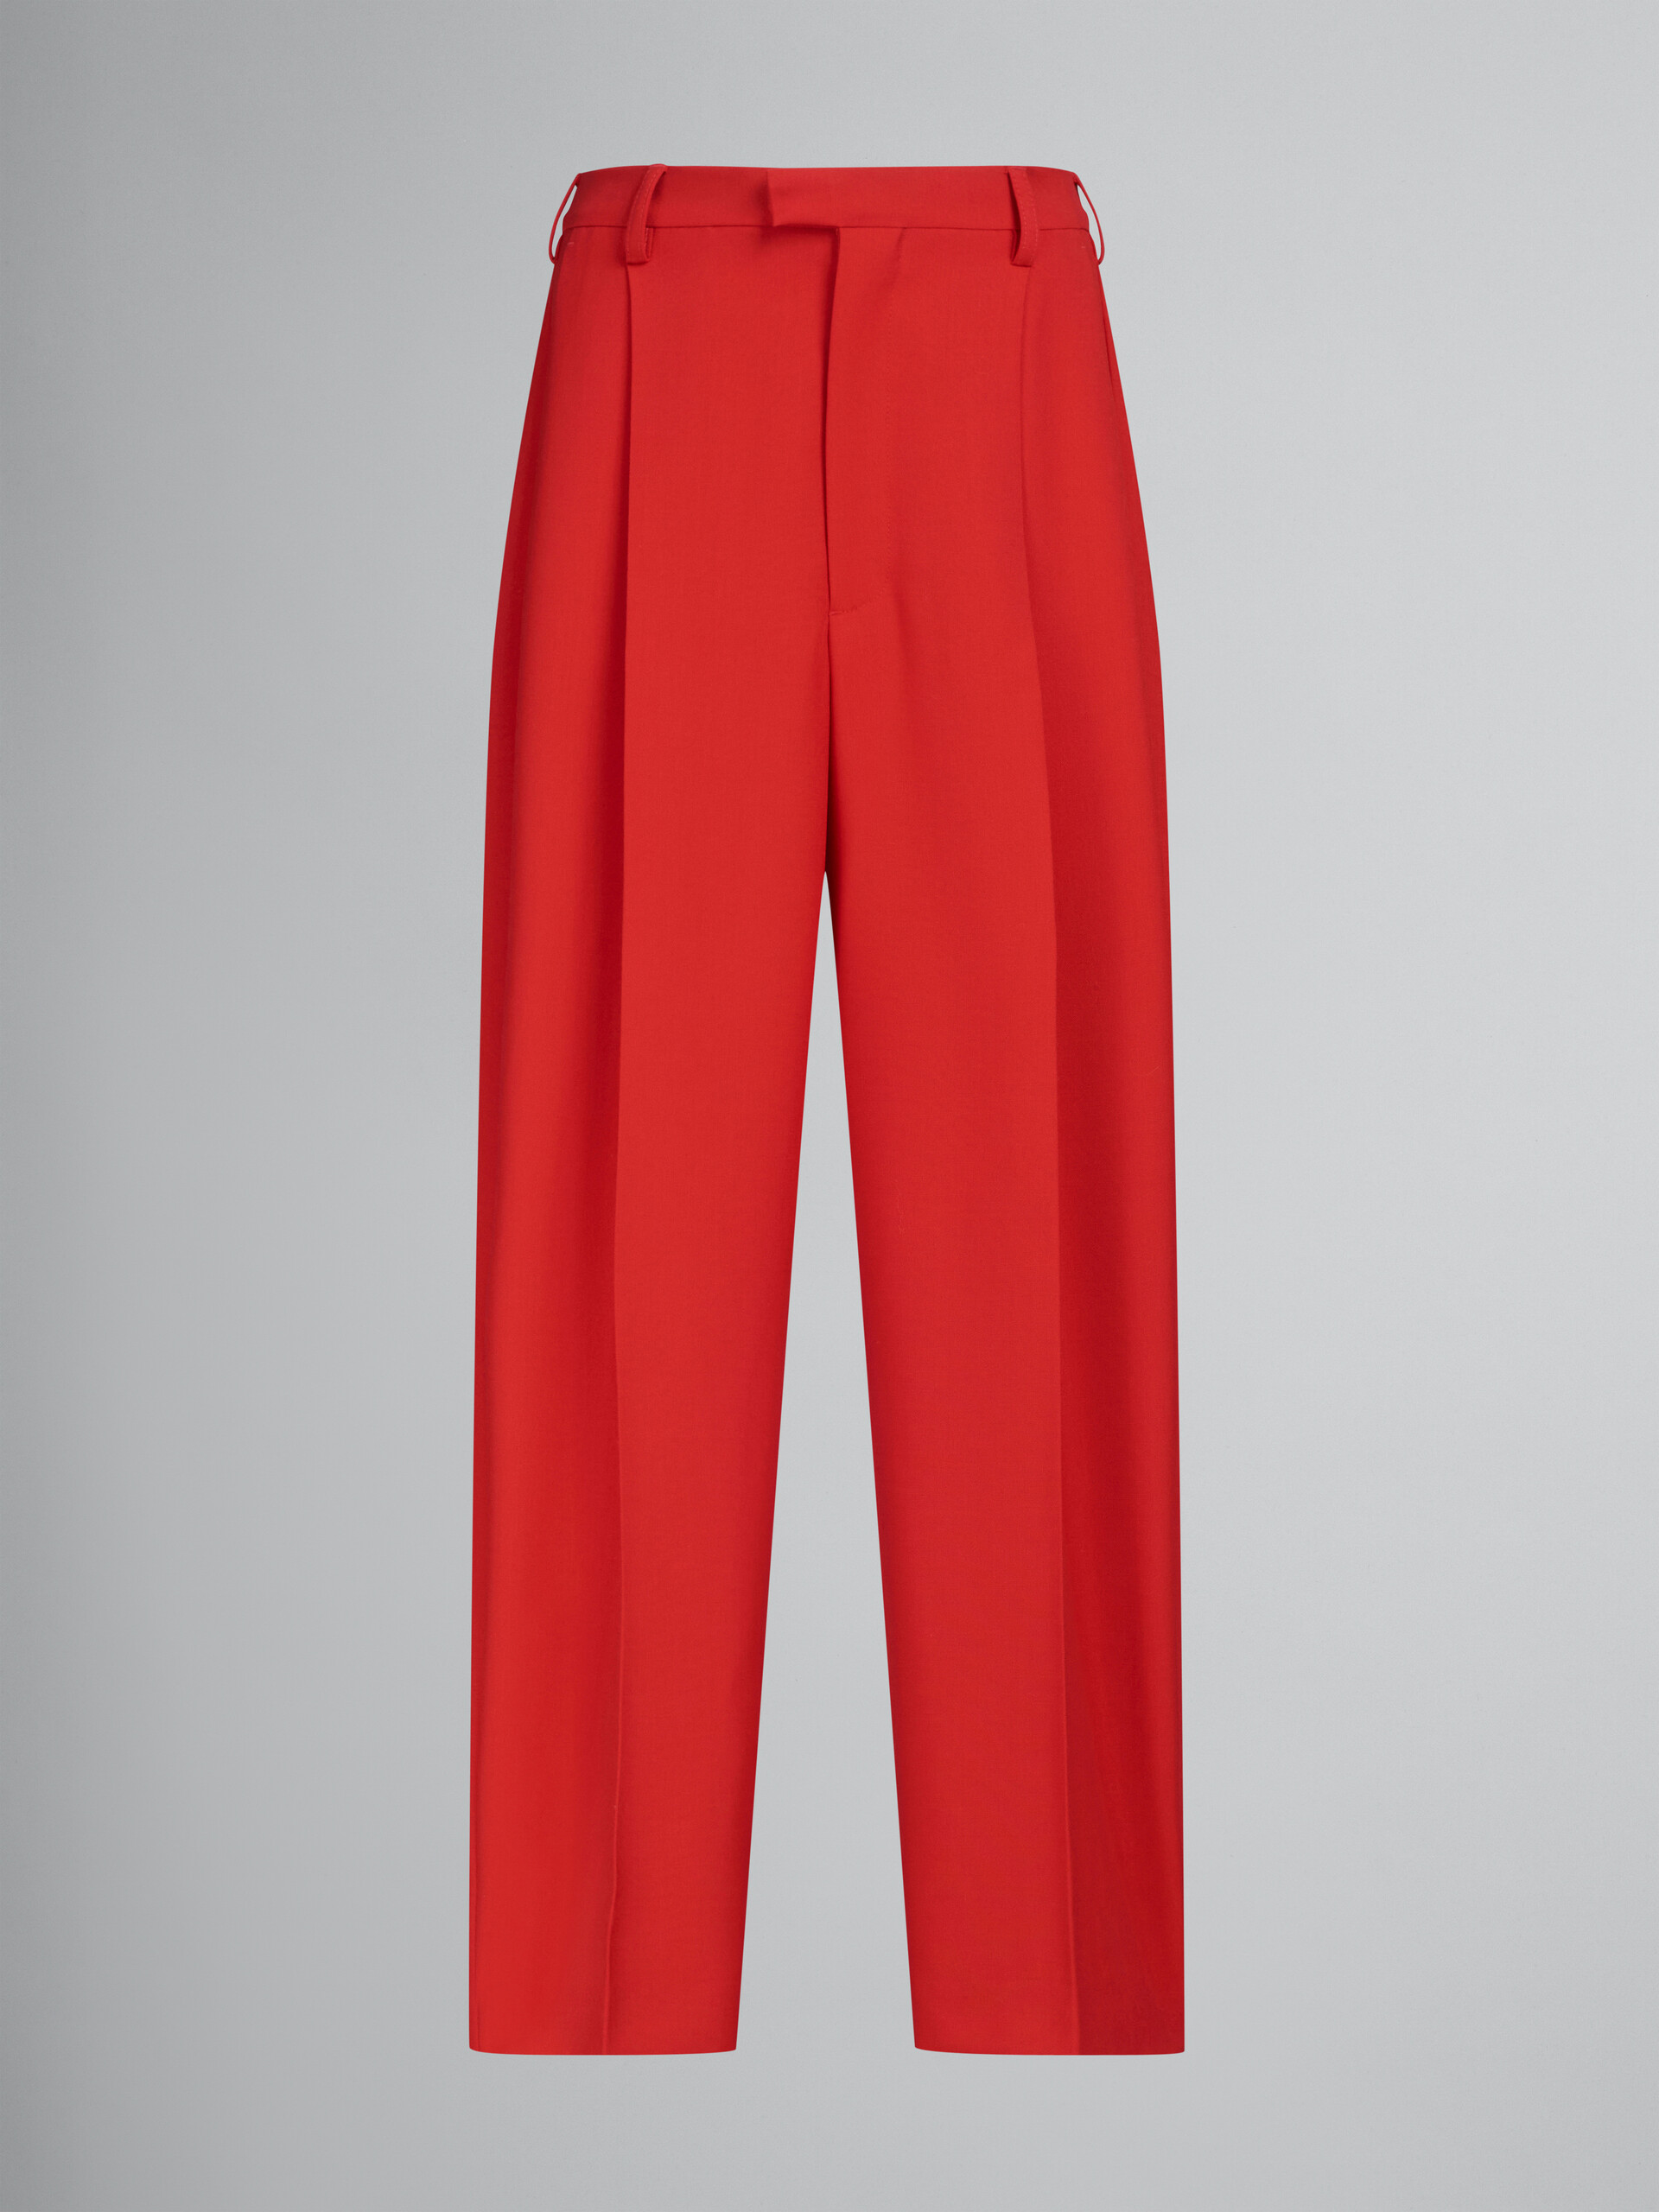 Black tropical wool tailored trousers - Pants - Image 1